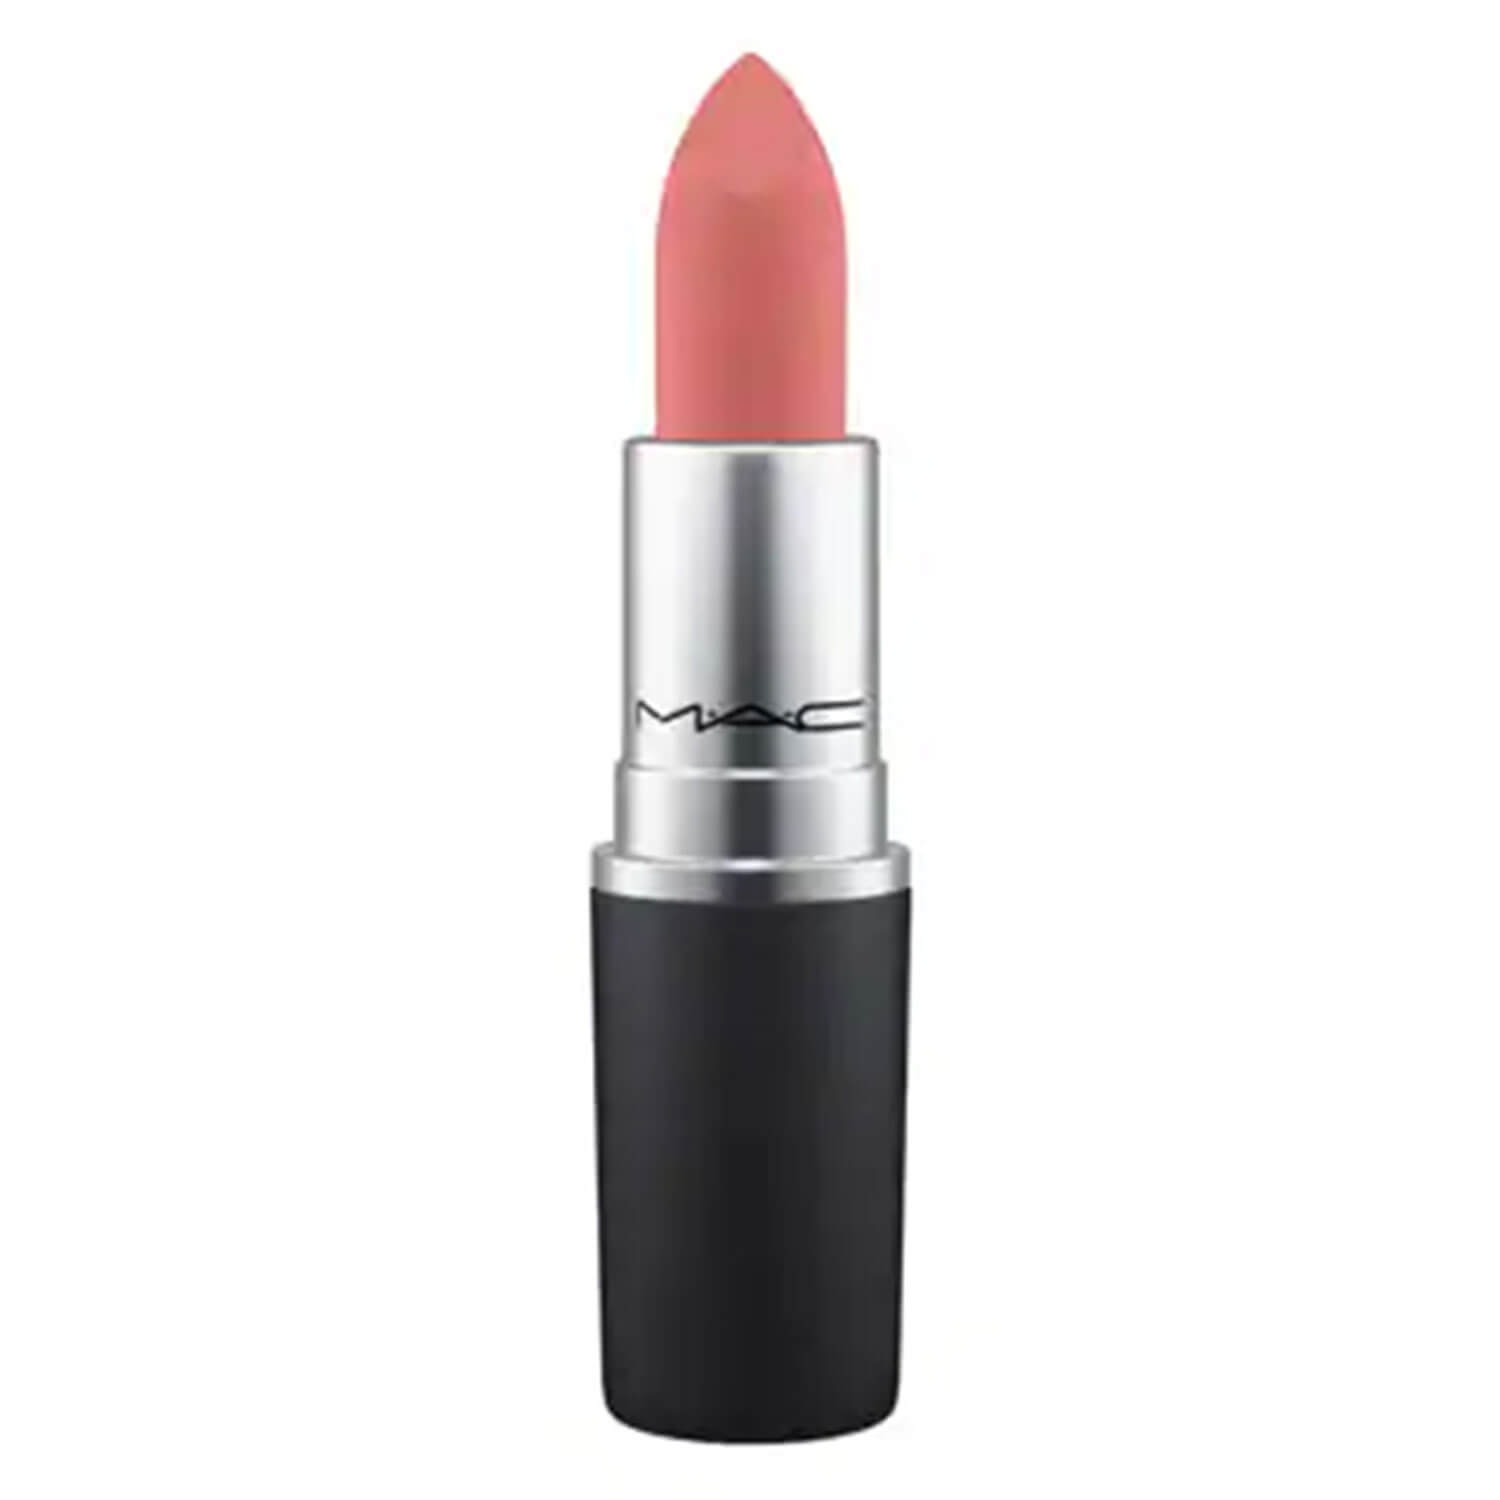 Product image from Powder Kiss - Sheermatte Lipstick Mull it Over